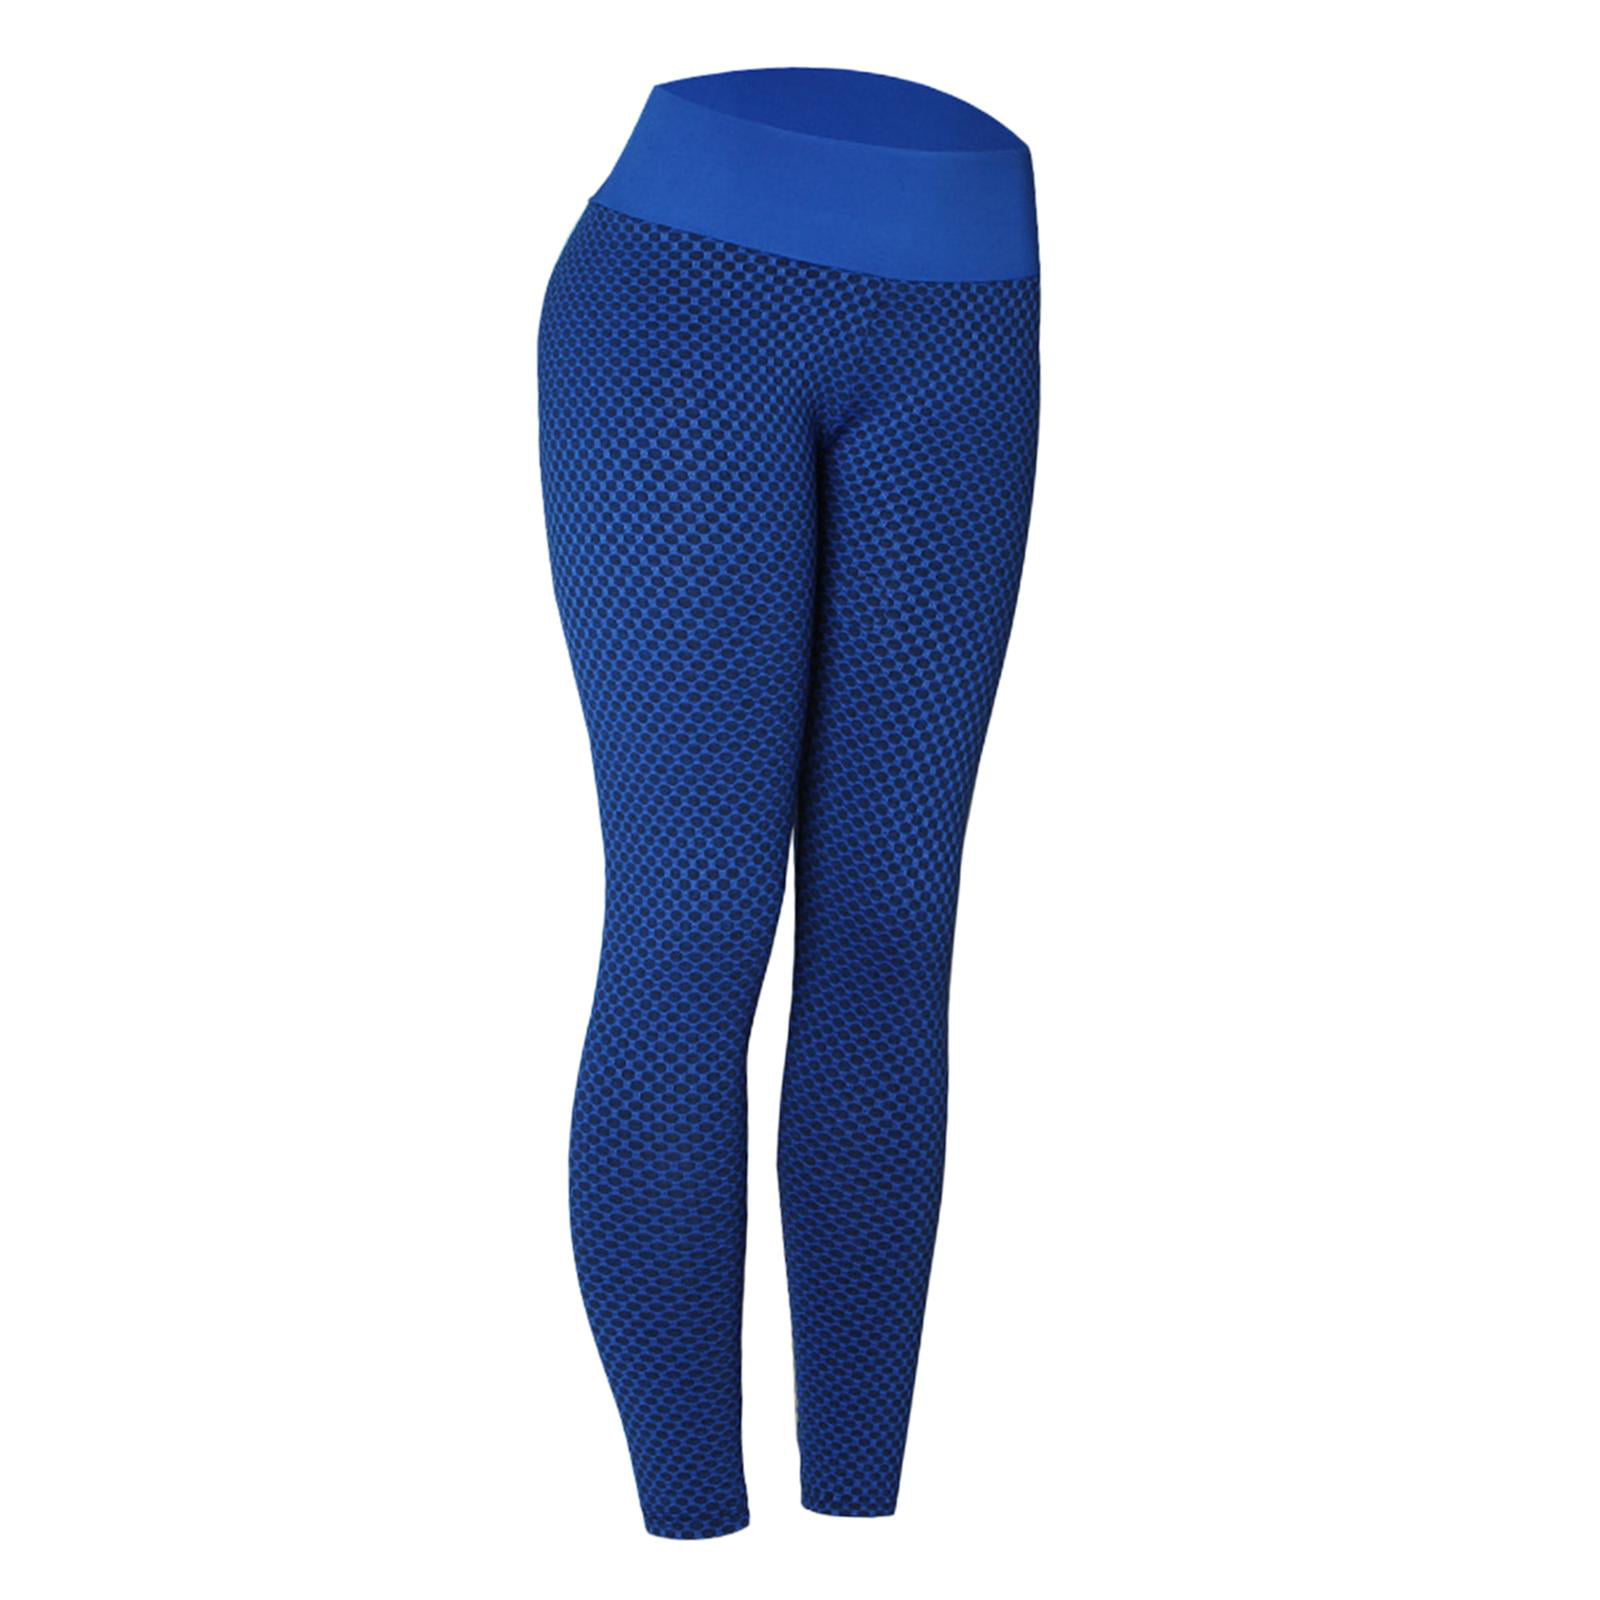 Details about   High Waist Women Yoga Pants Leggings Pockets Compression Workout Ruched Trousers 